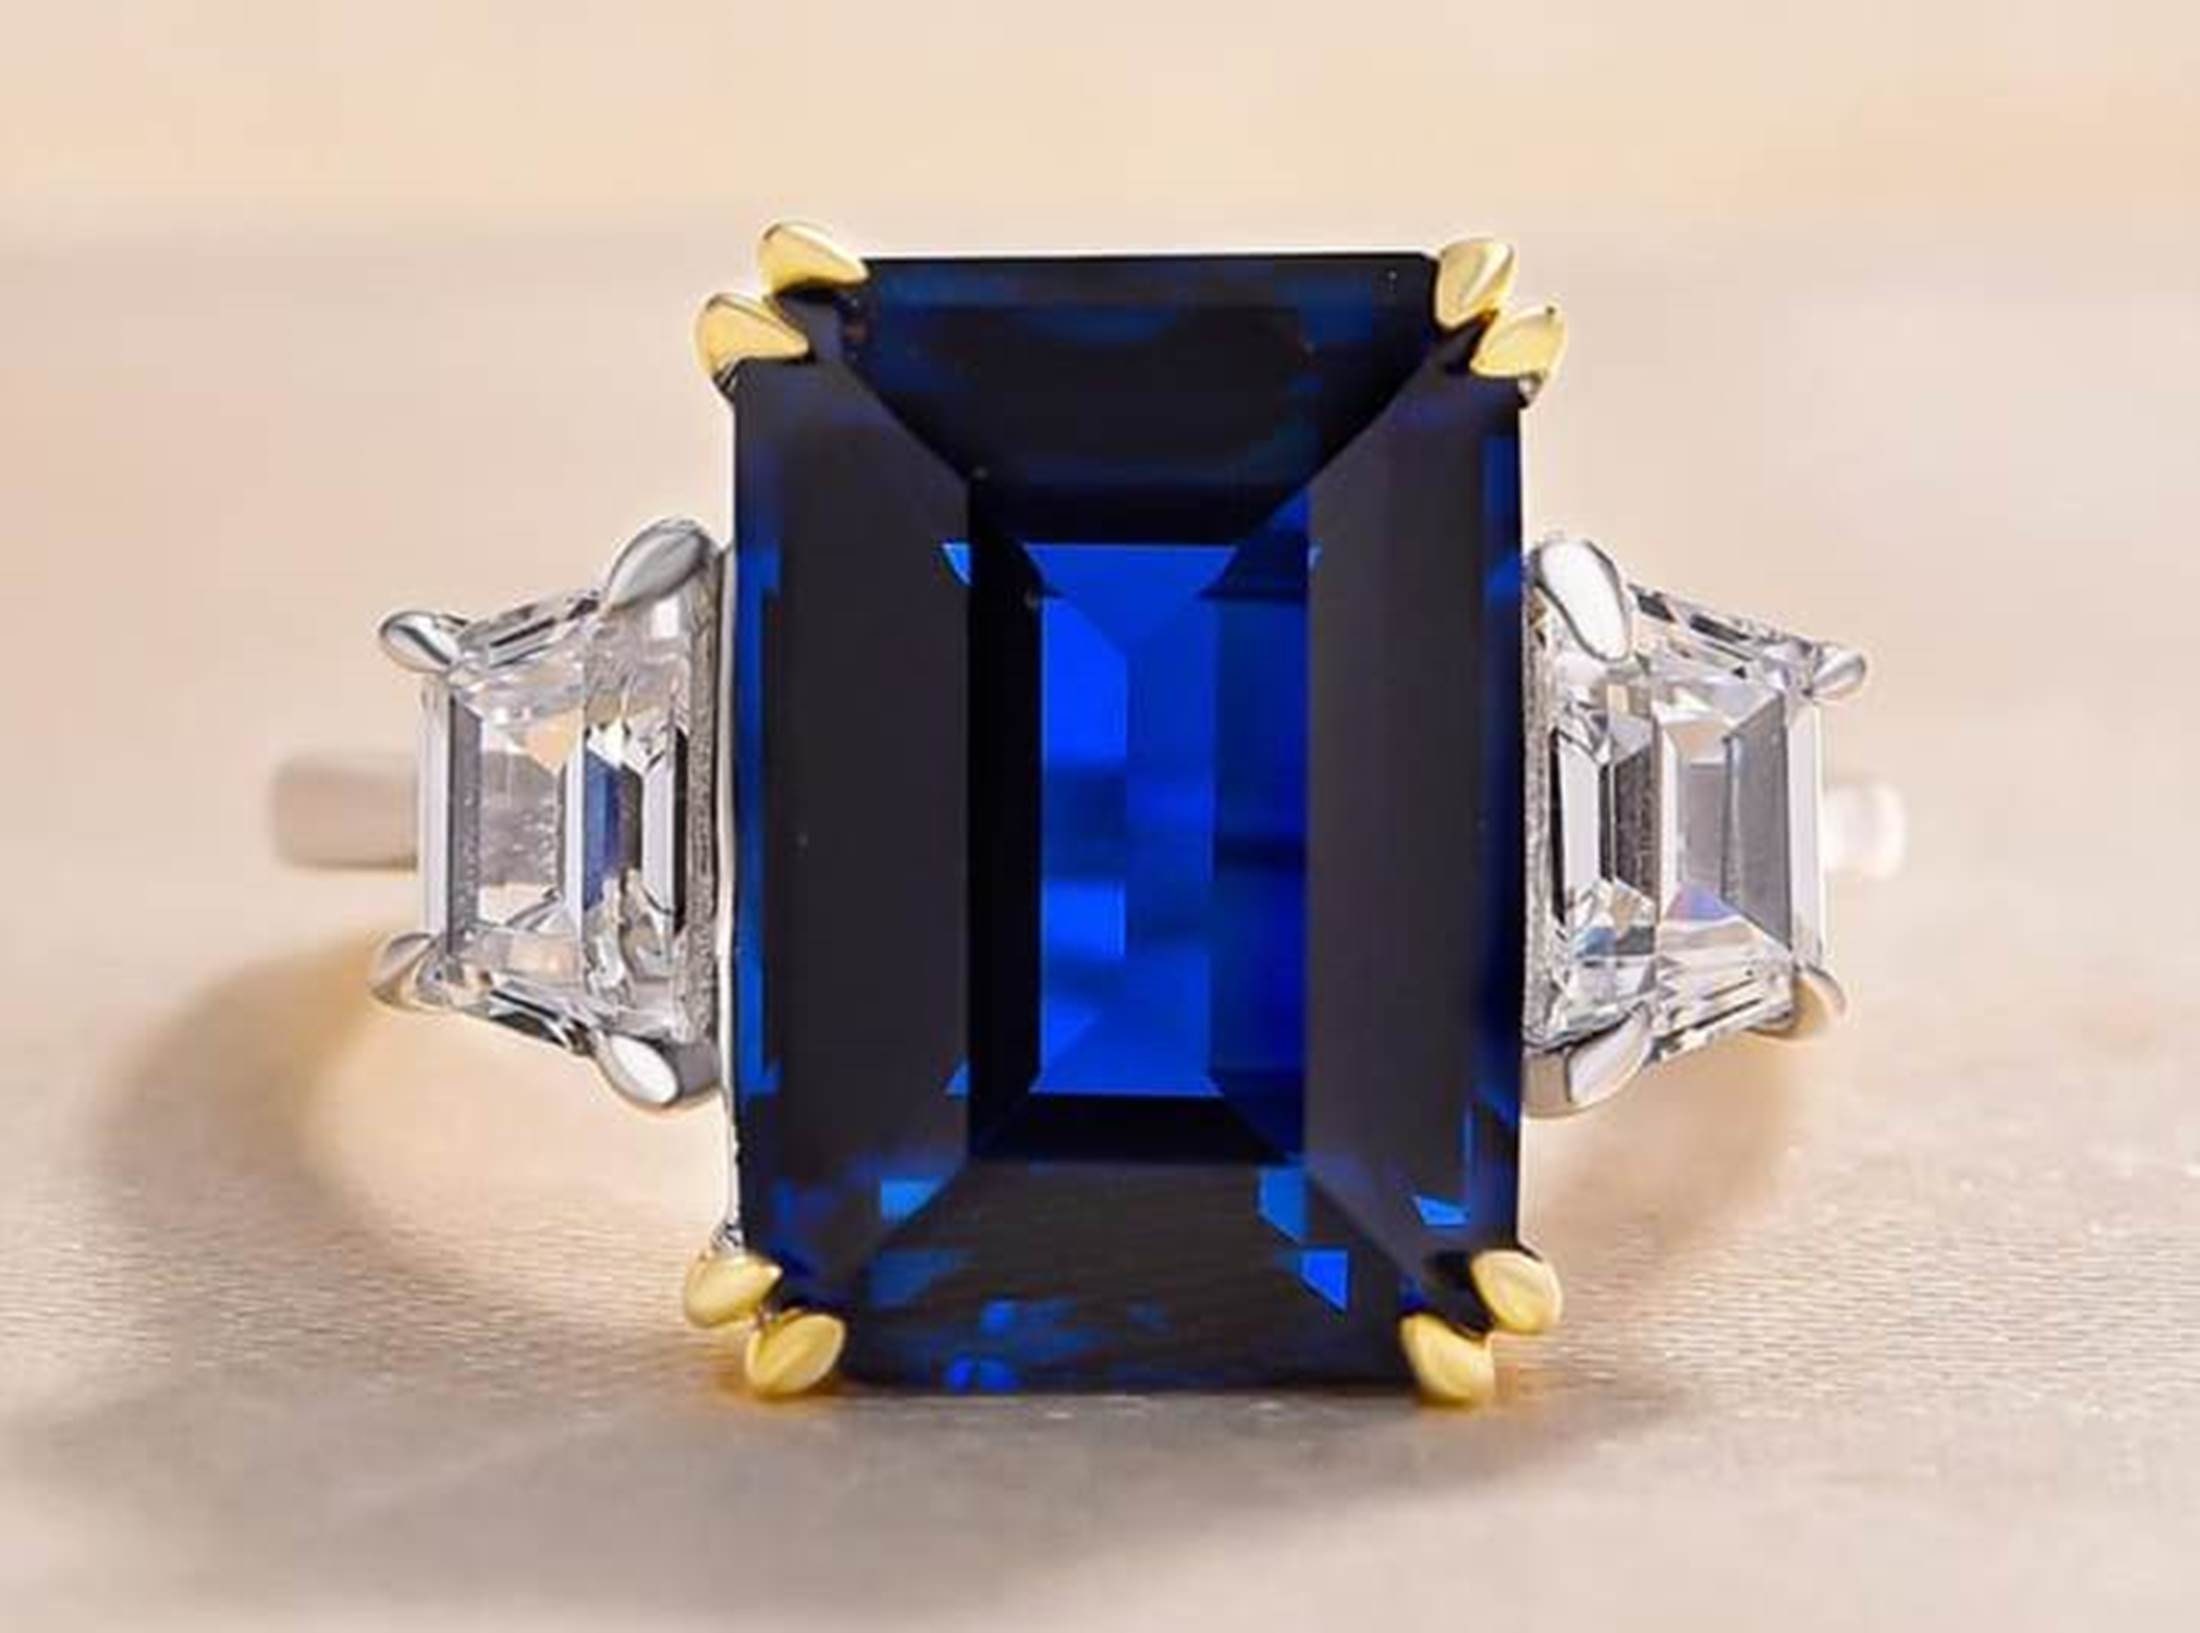 Buy SIDHARTH GEMS 14.25 Ratti (AA++) Certified Blue Sapphire Ring (Nilam/ Neelam Stone Silver Plated Ring)(Size 20 to 23) for Men and Woman at  Amazon.in